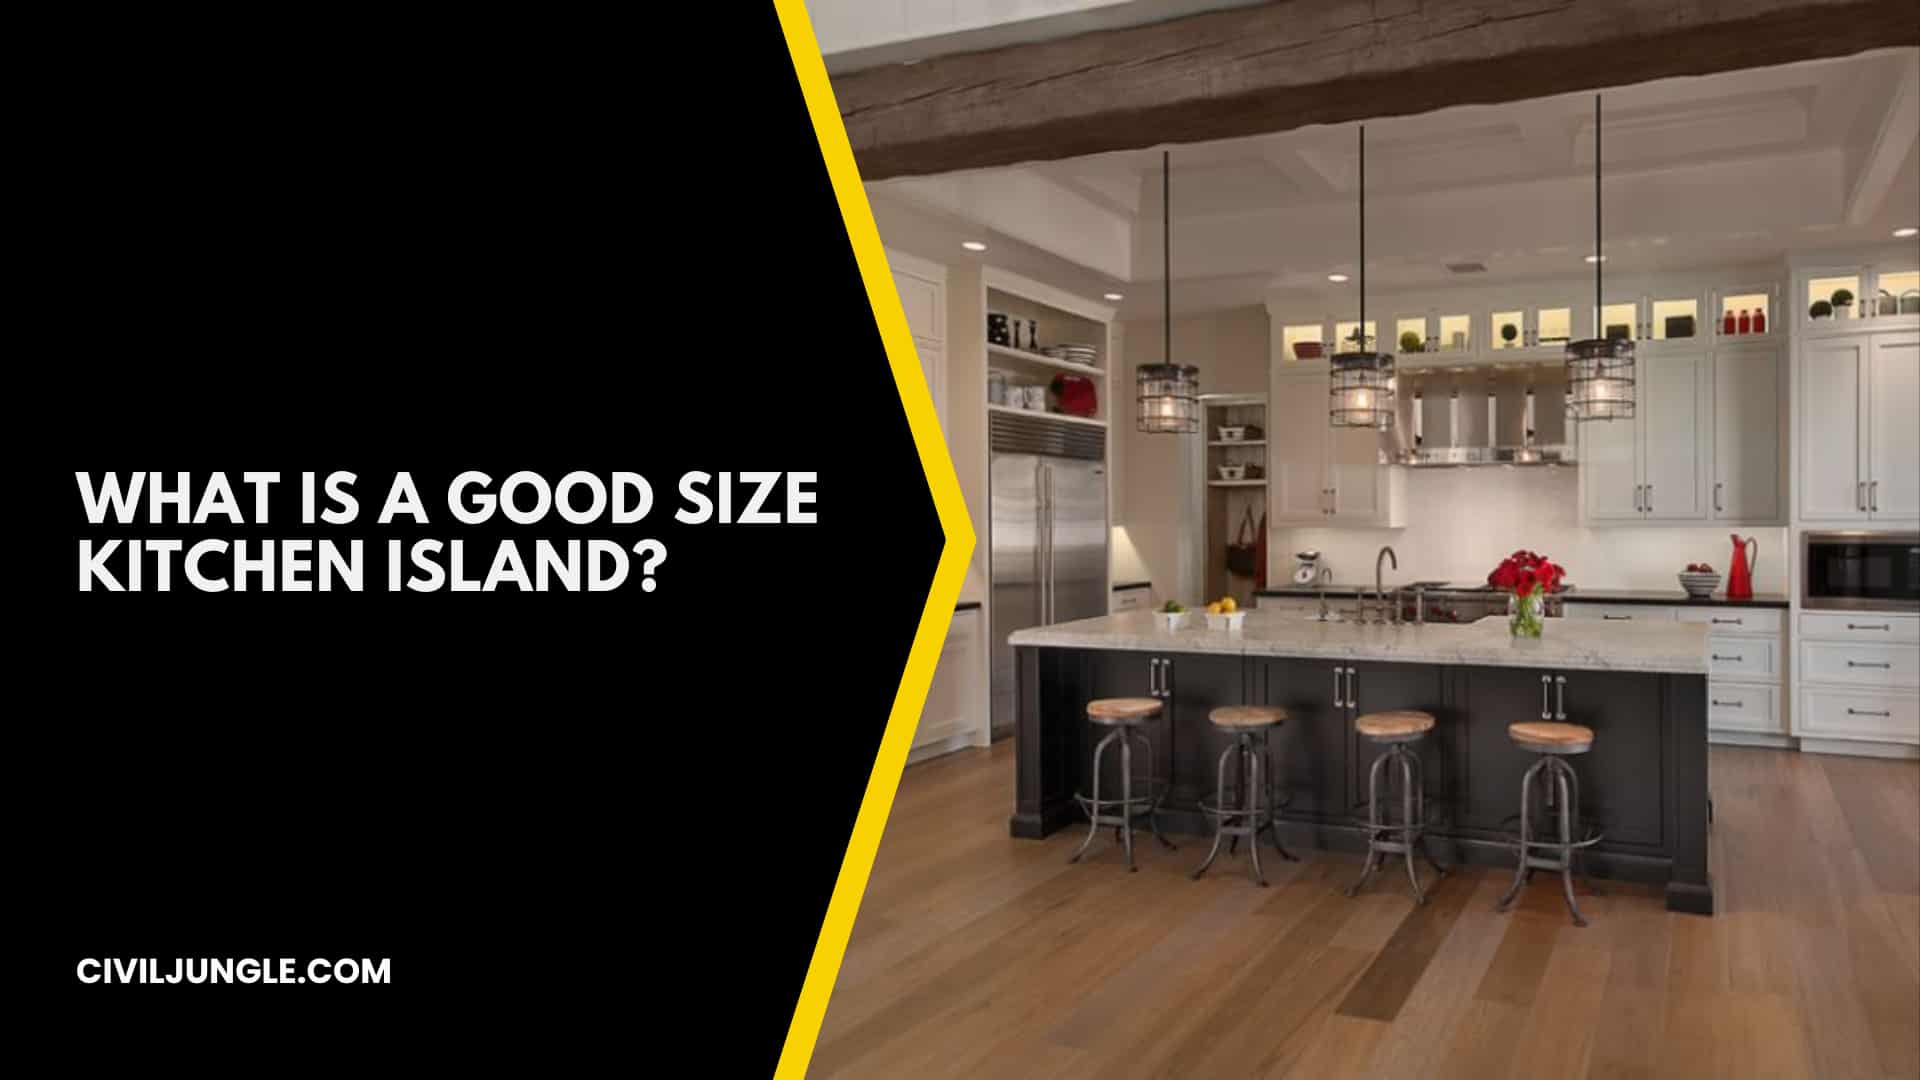 What Is a Good Size Kitchen Island?